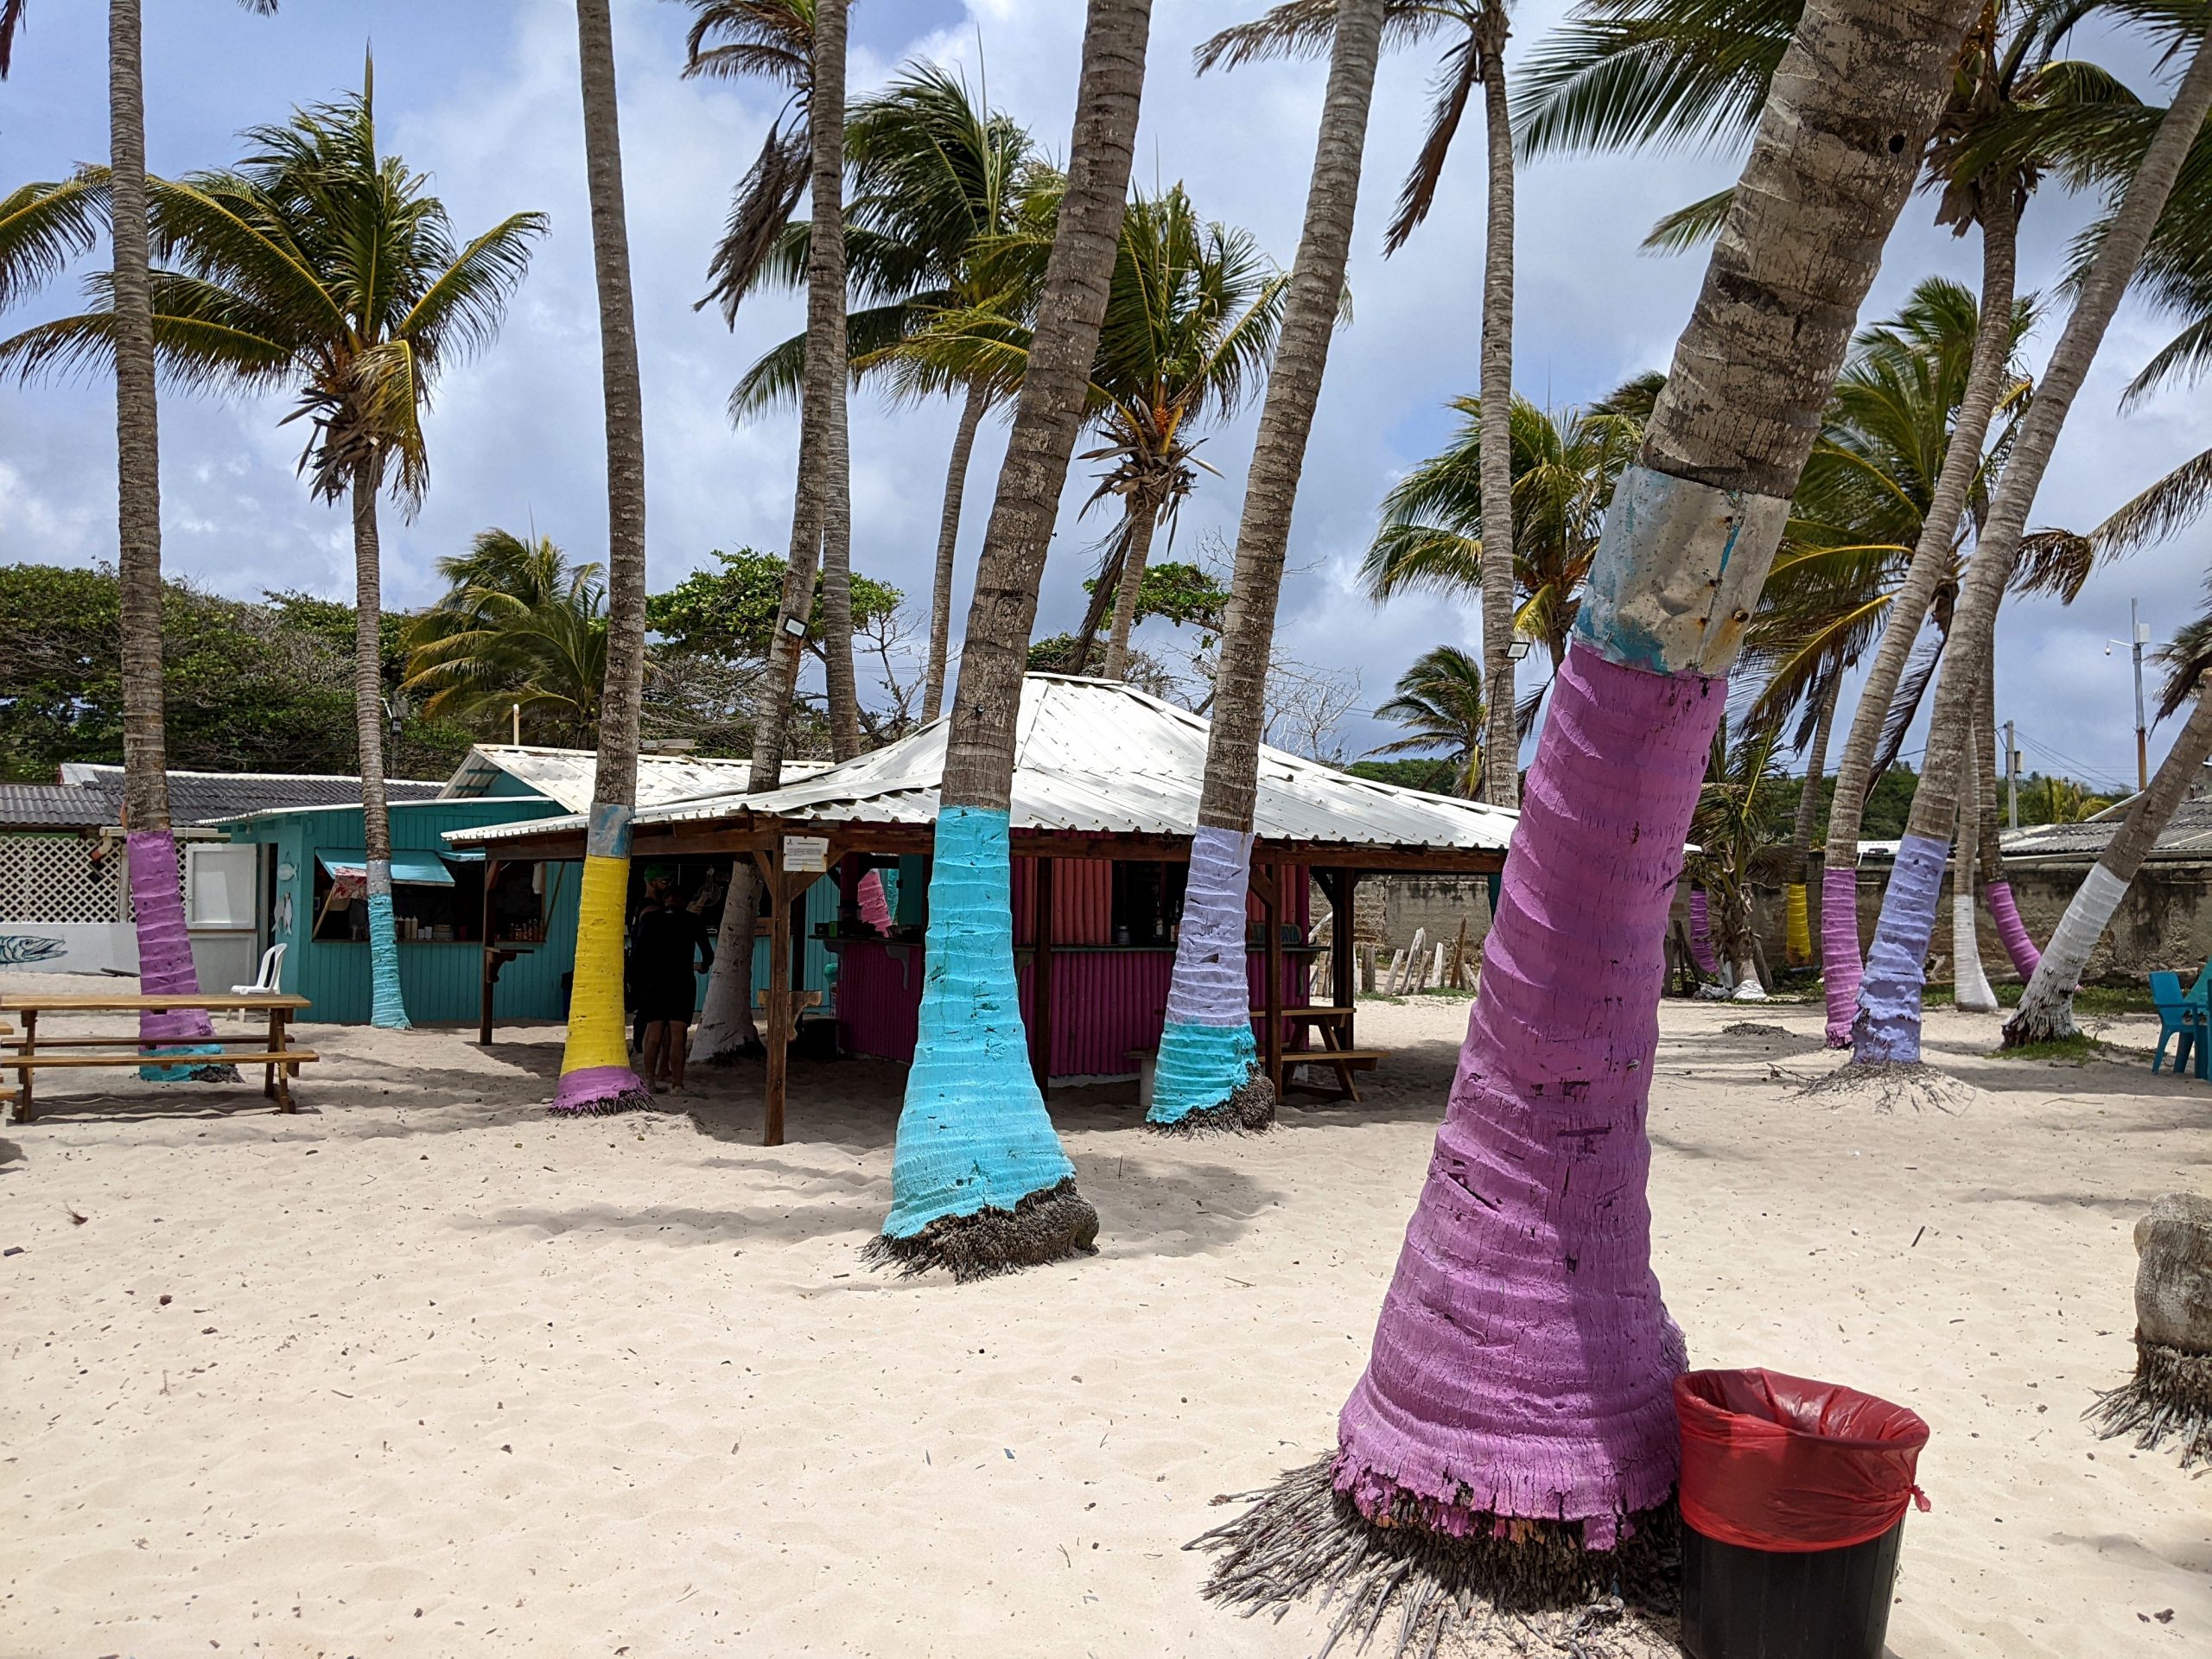 The Complete Guide To San Andres - Jet Set Together